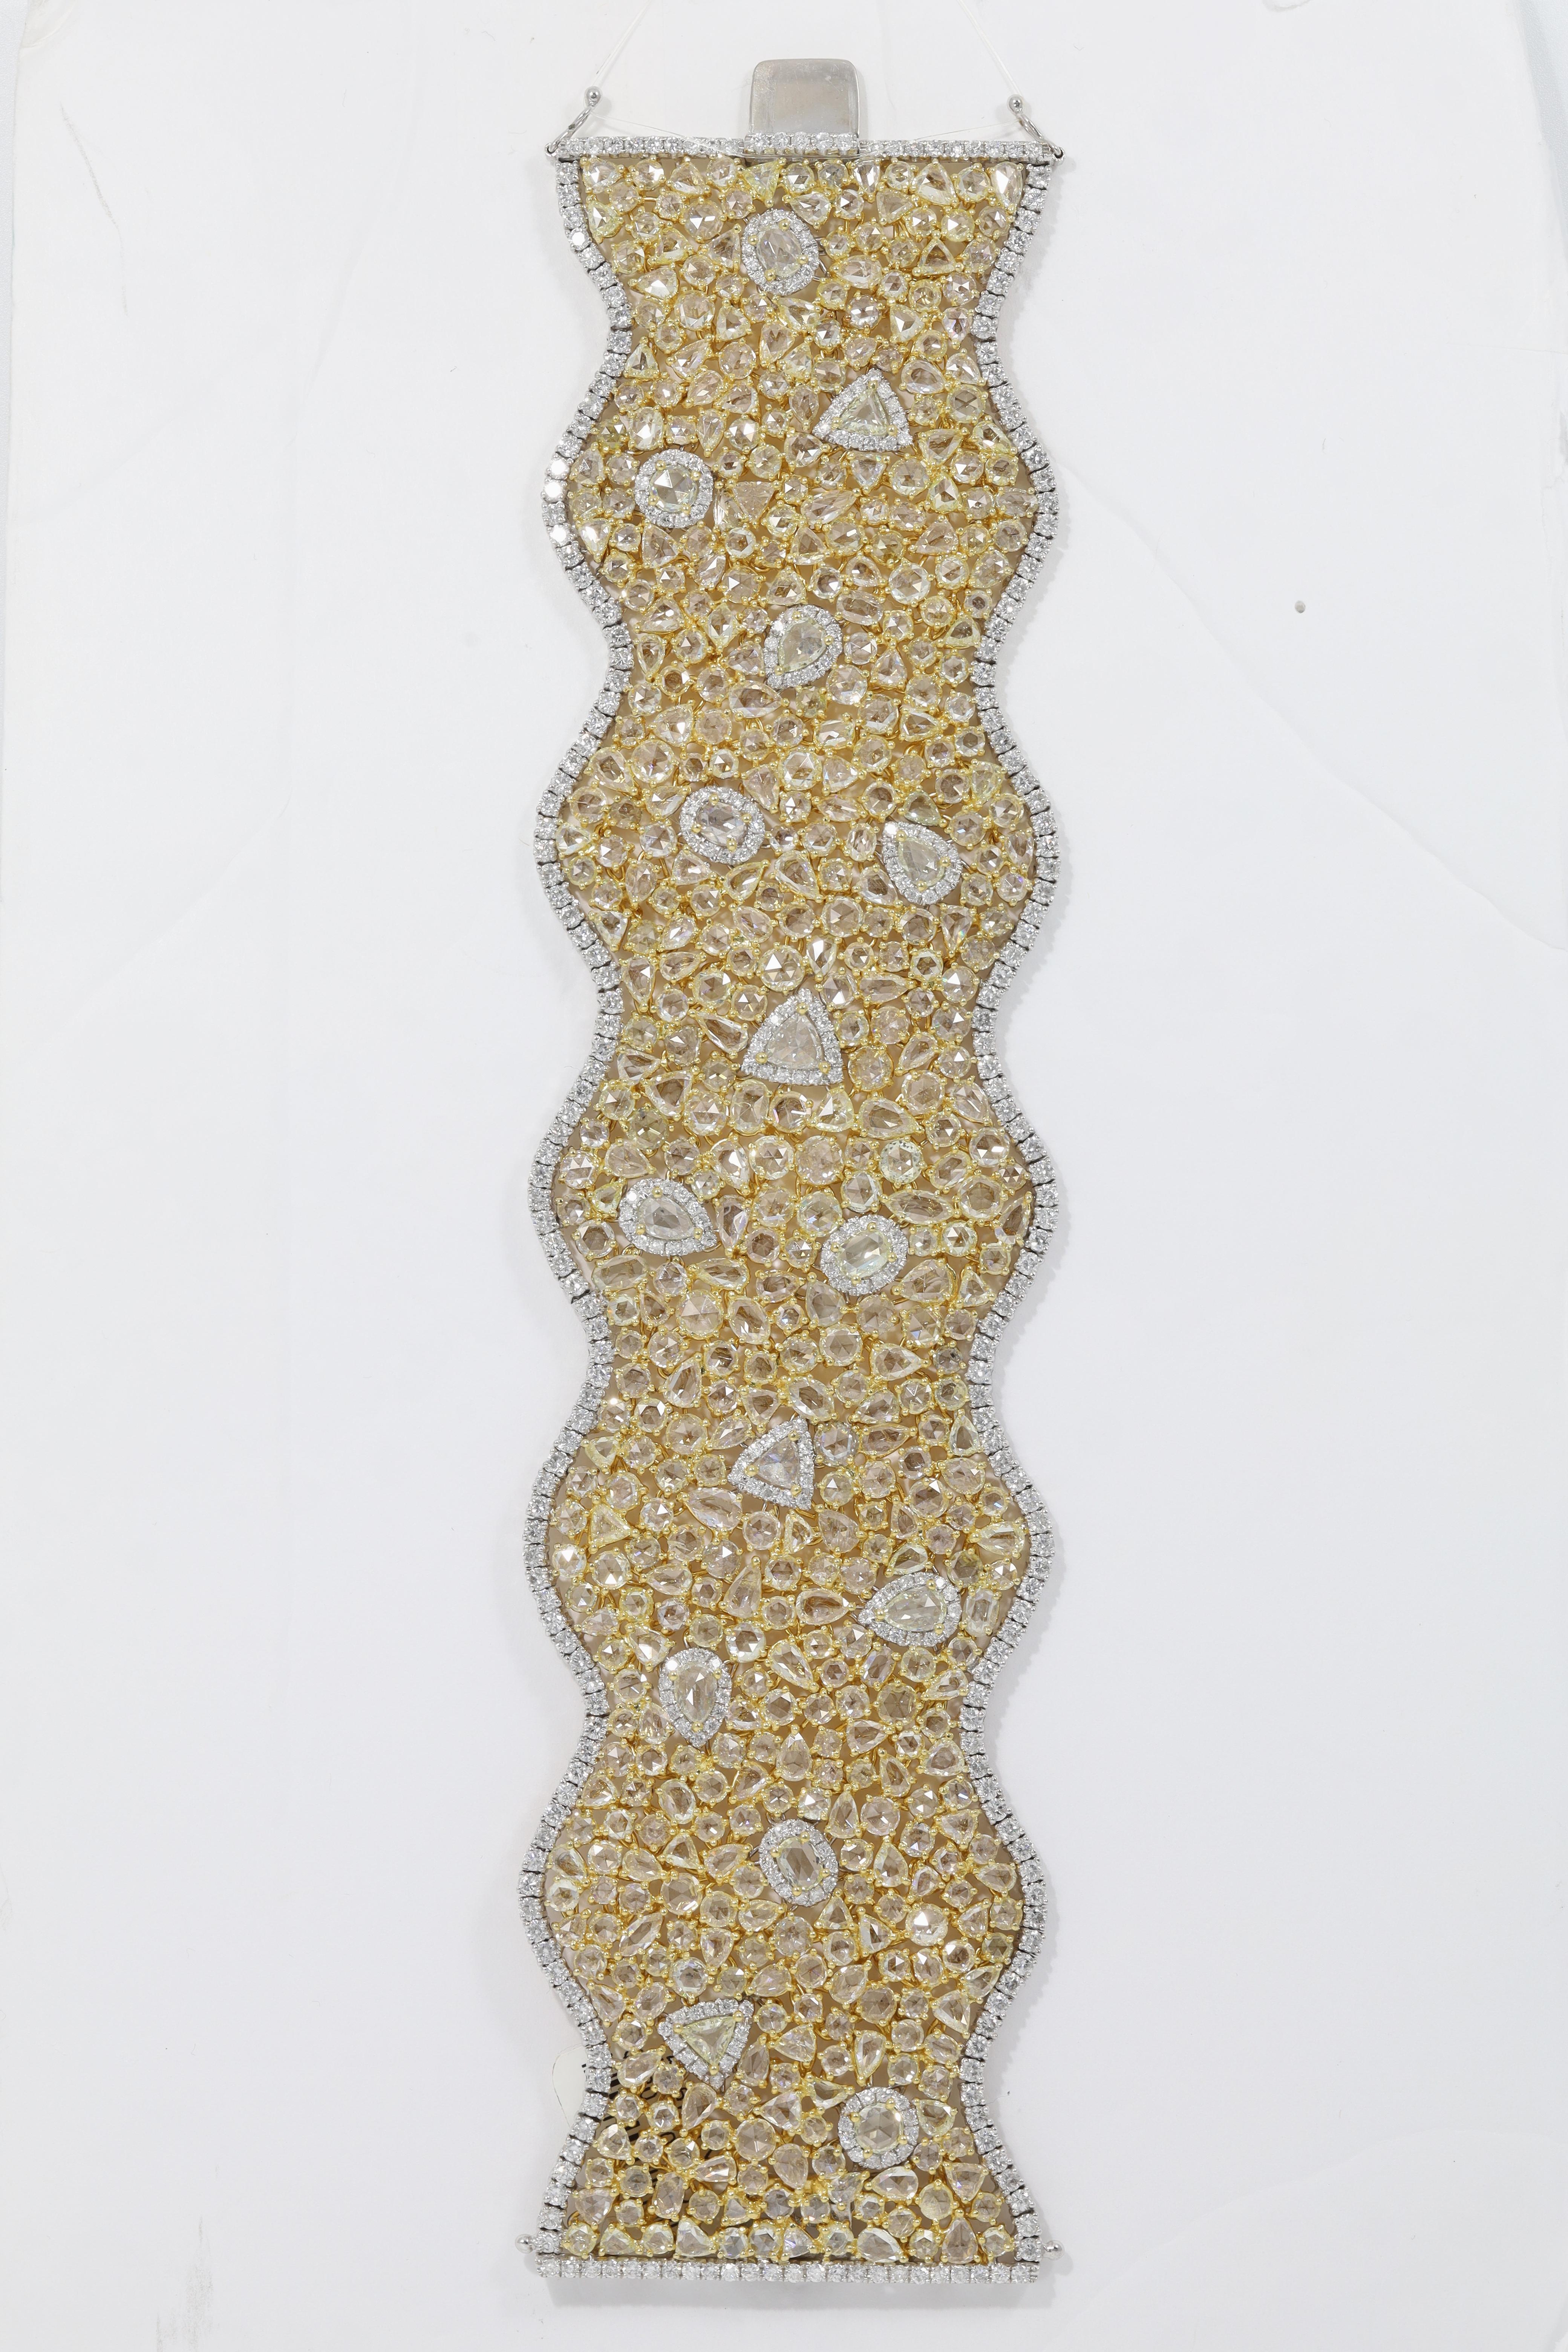 Mixed Cut Diana M. 18kt white and yellow gold bracelet featuring 56.67cts of diamonds  For Sale